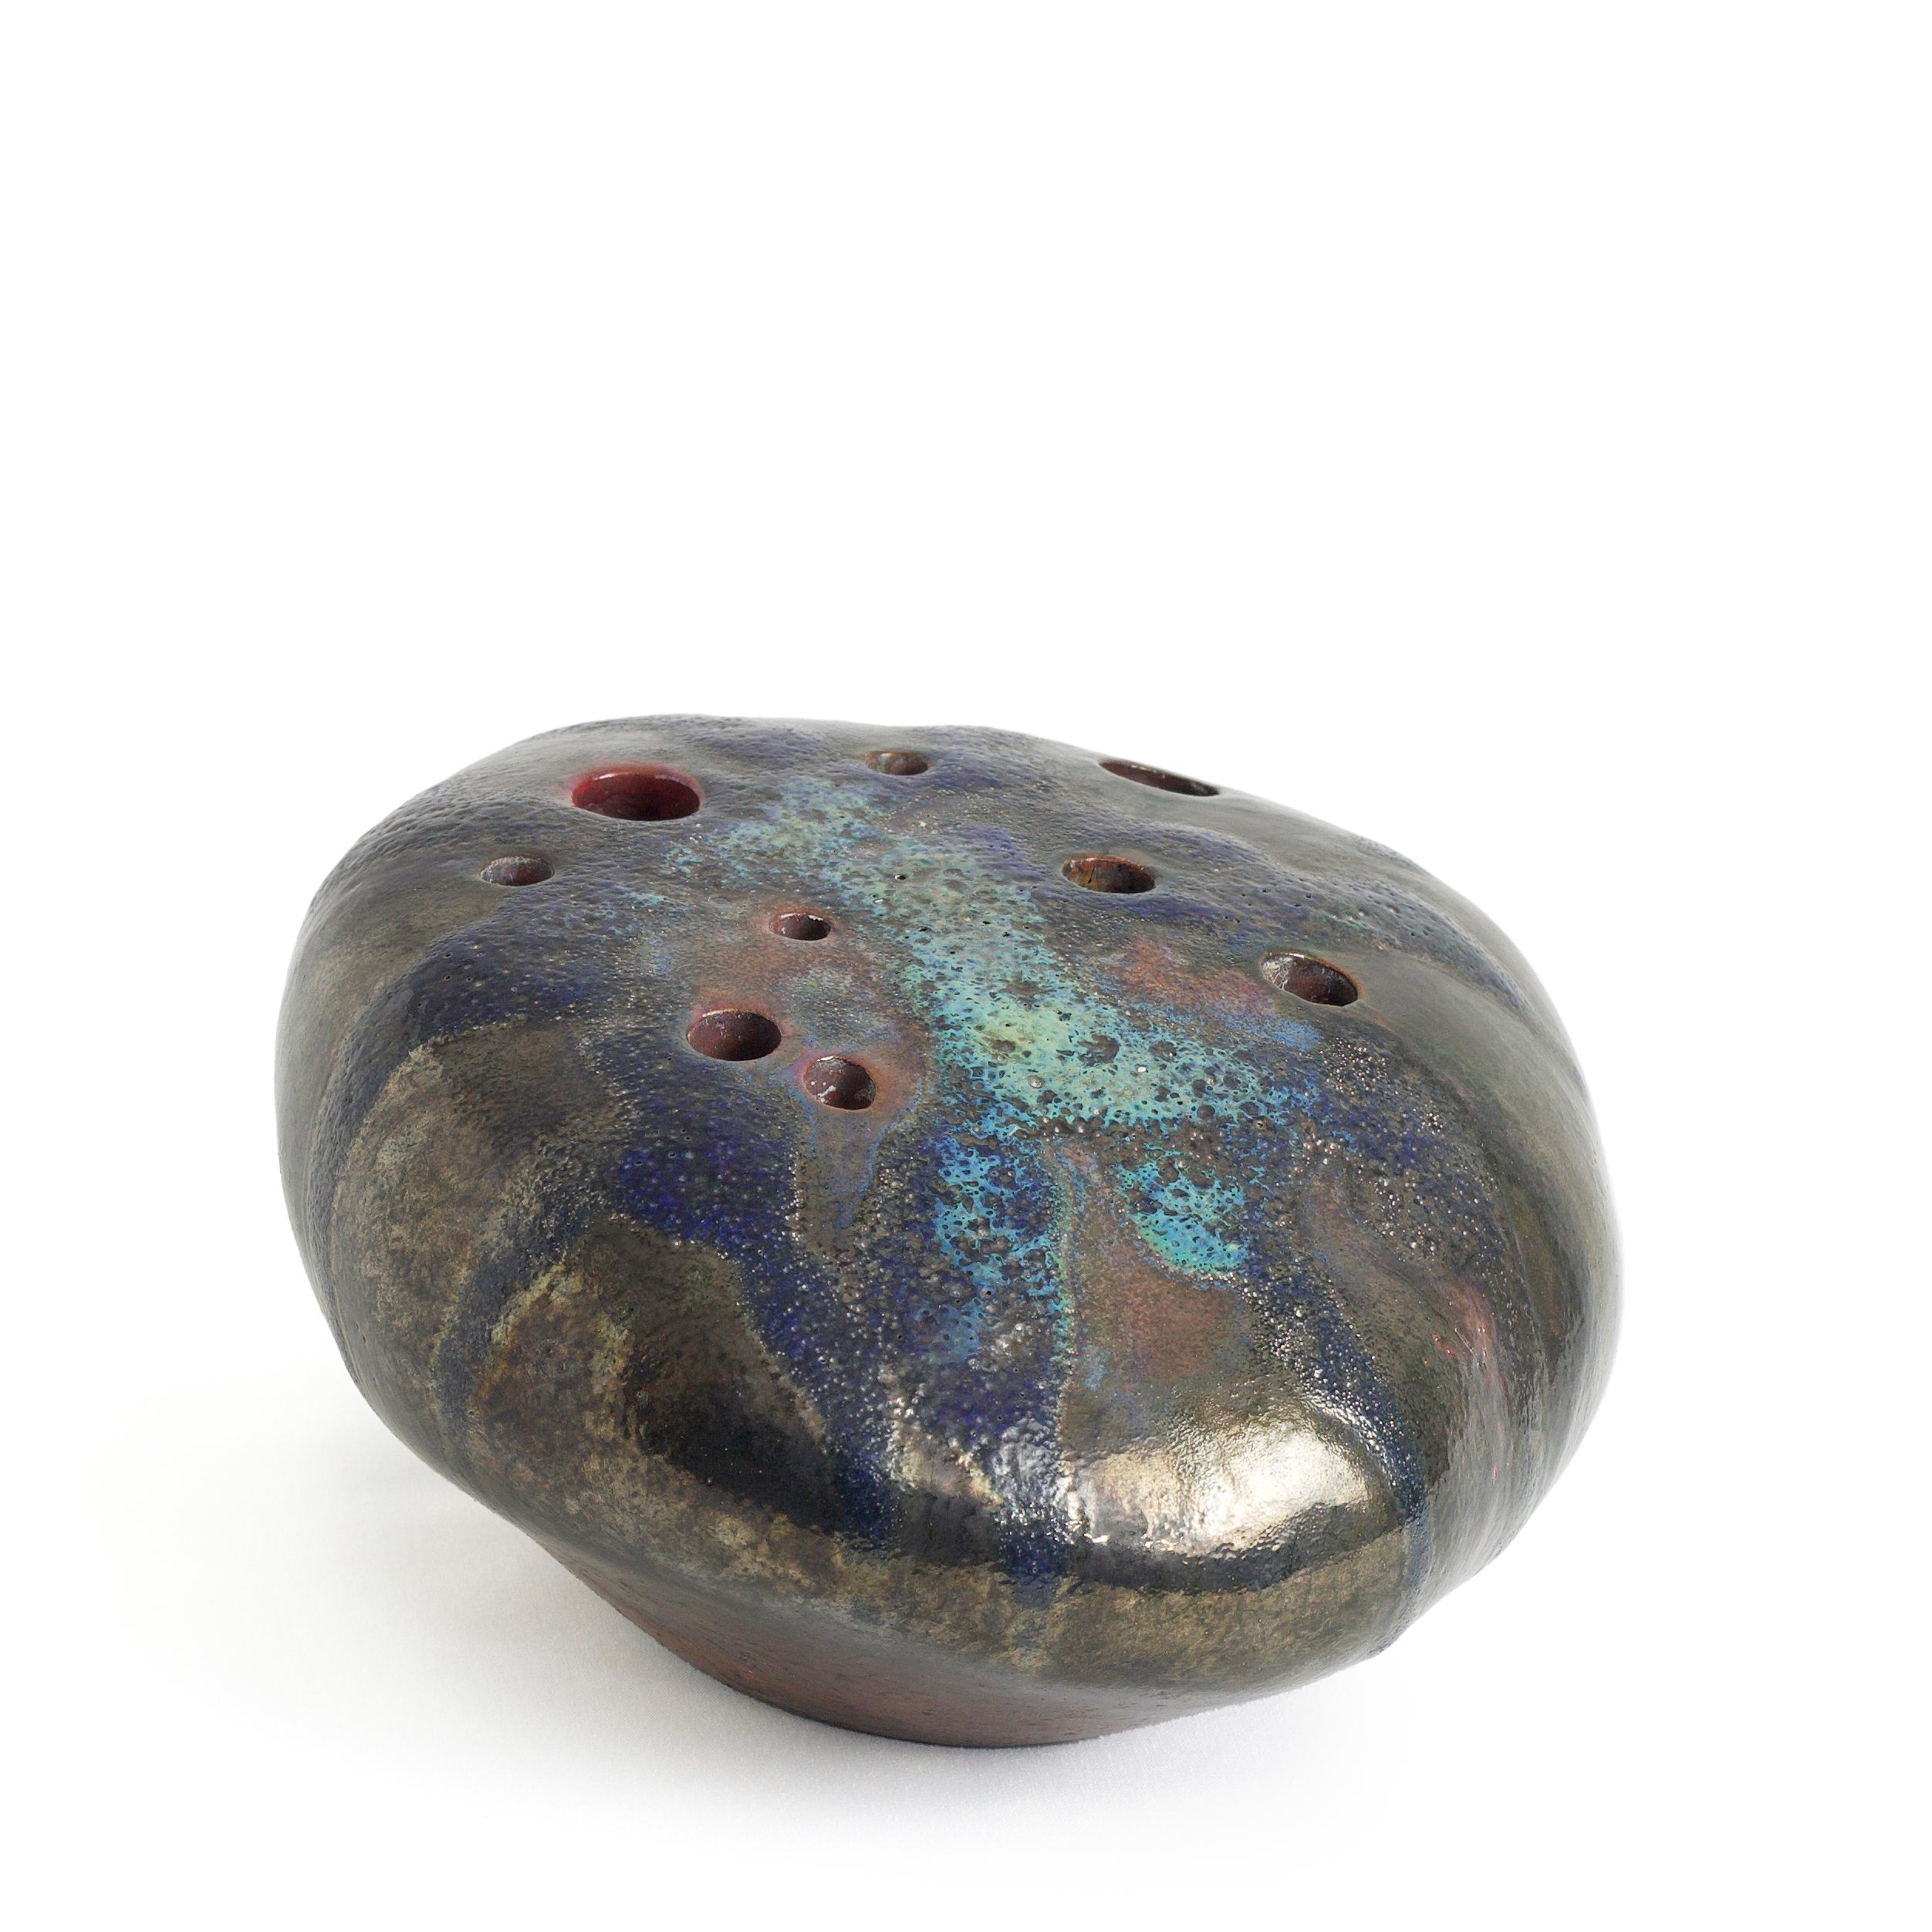 A Ceramic Raku fired rock shaped sculpture. Designed as an ikebana, and an incense holder, this ceramic peddle shows an interesting pattern of holes and green copper strains, highlighted by the dark metal predominant color that turns into oxide iron